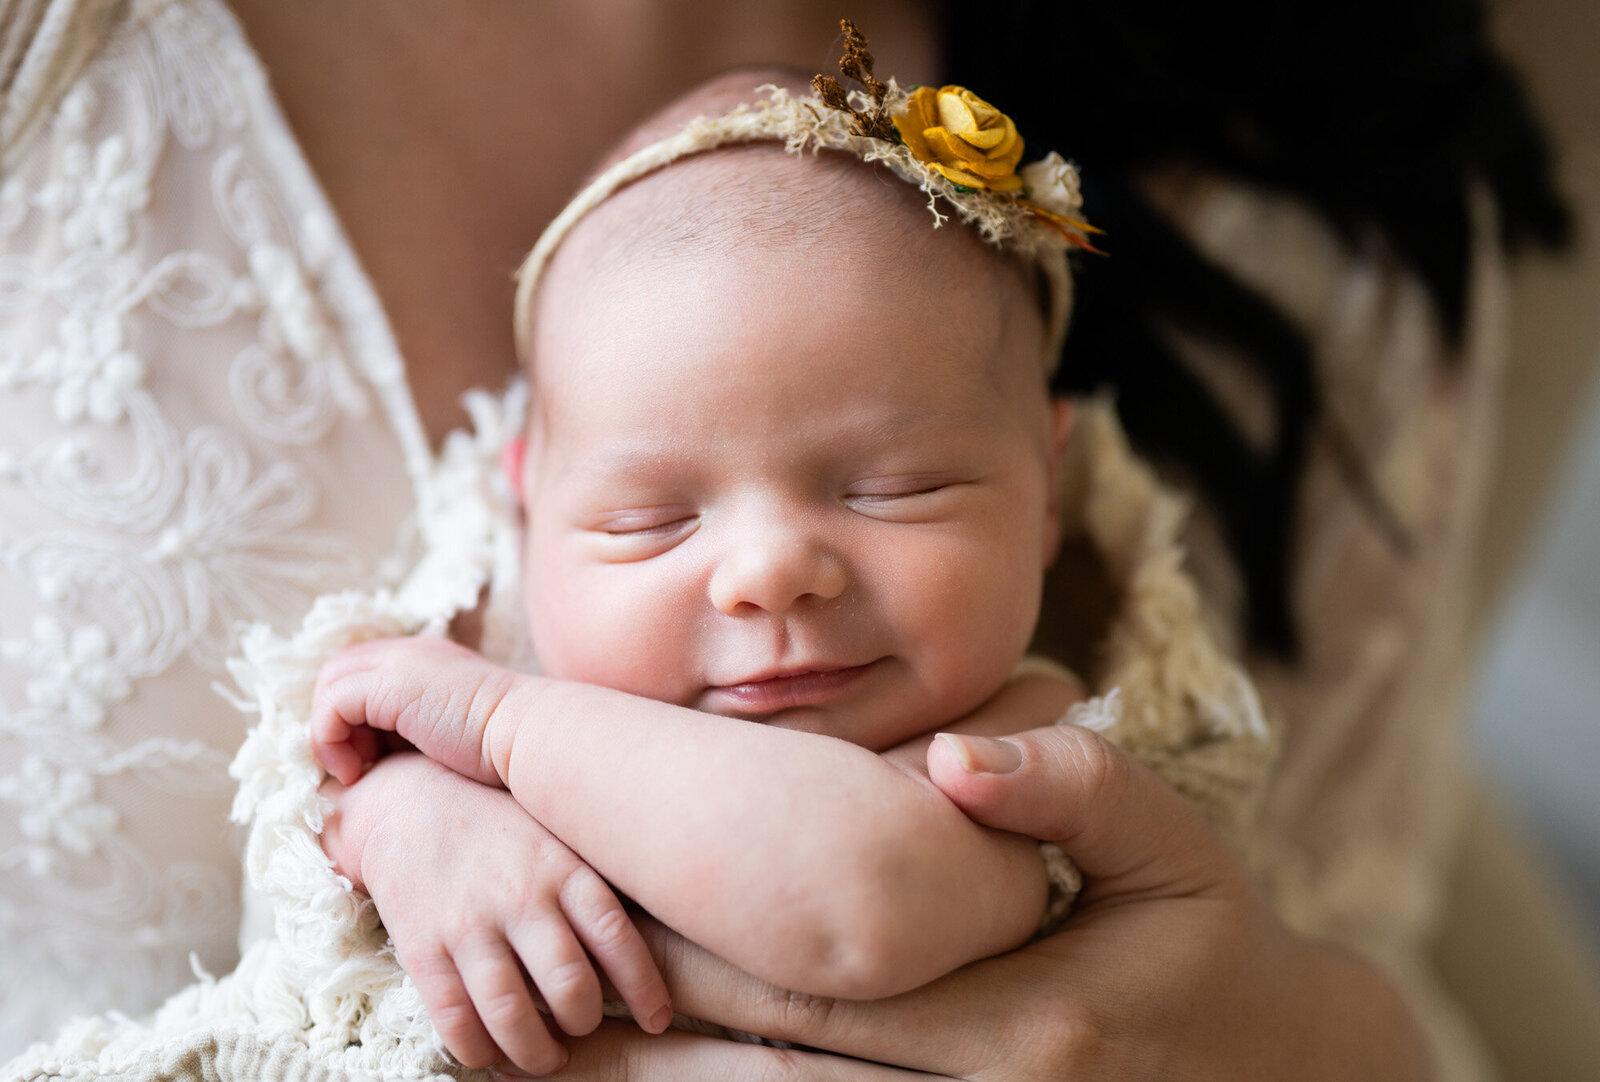 Newborn Baby smiling in her sleep with a yellow floral headband.